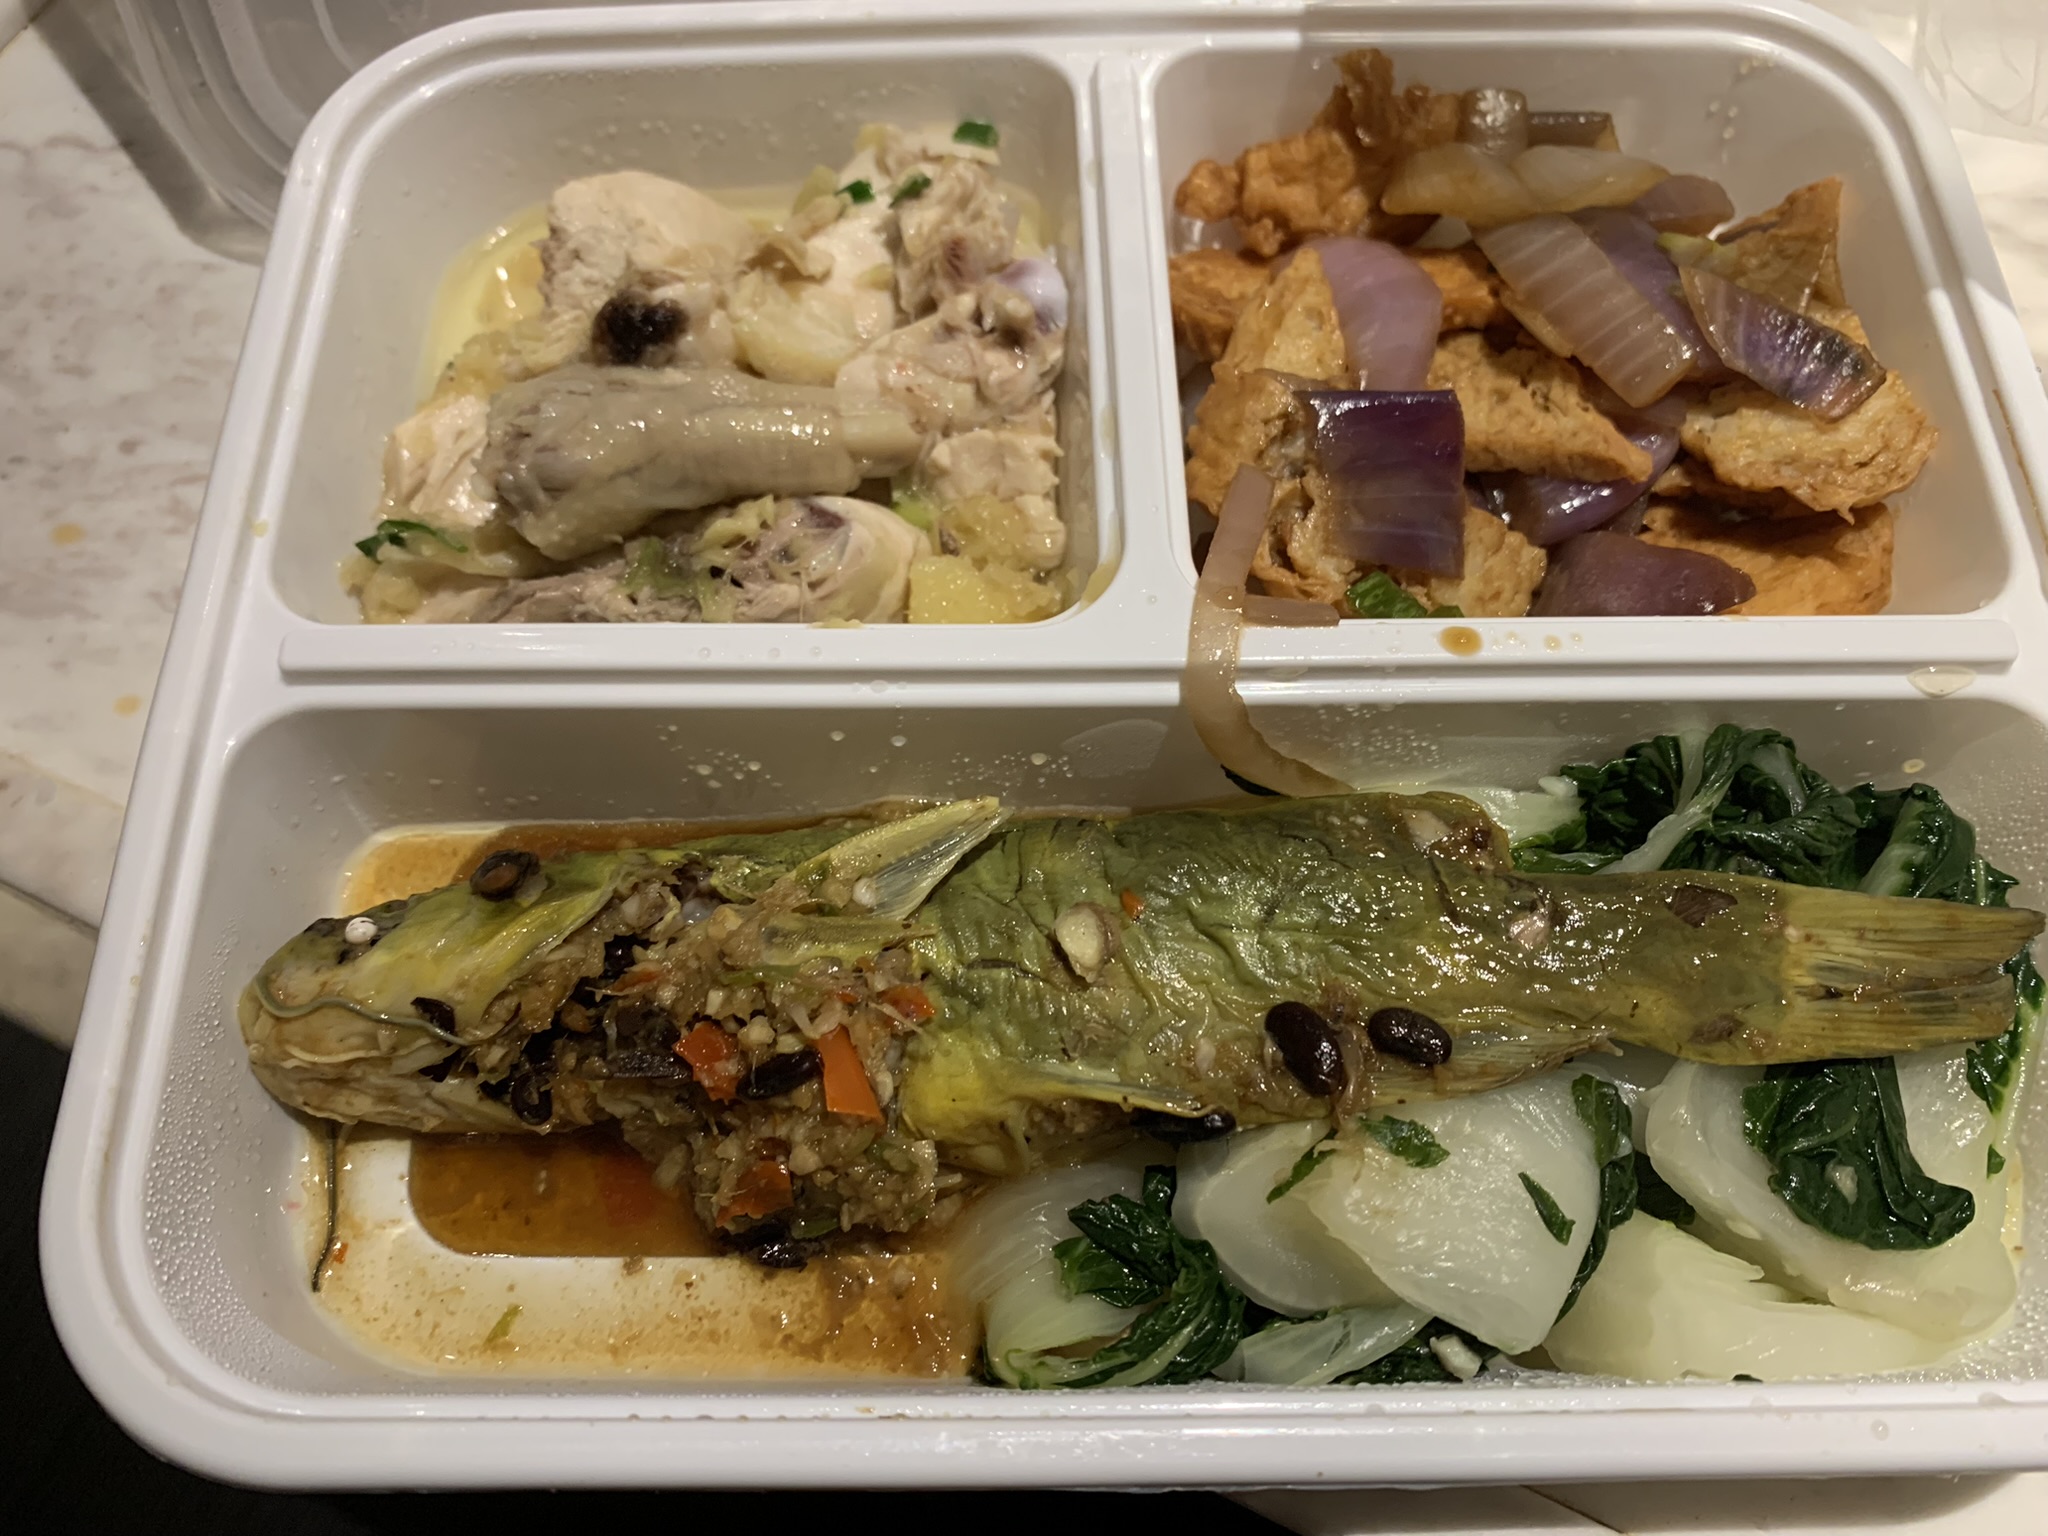 Whole fish and other food